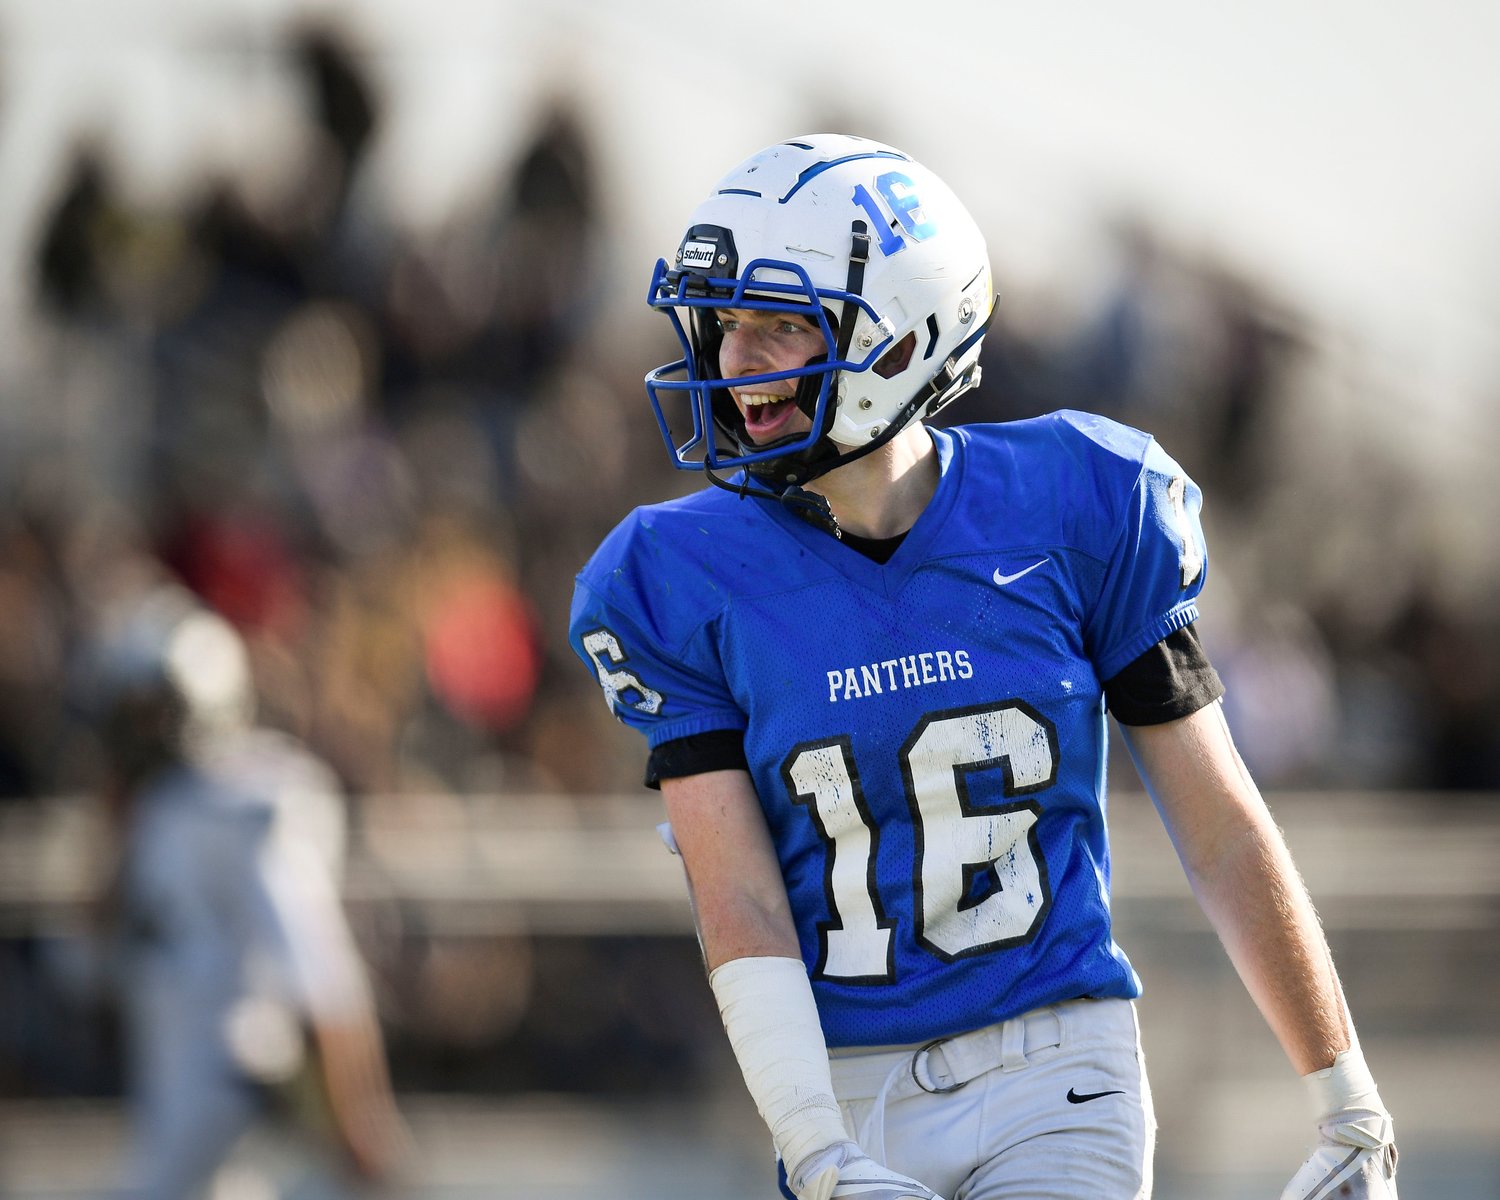 Quakertown’s Adam Streahle after defending a pass in the third quarter.